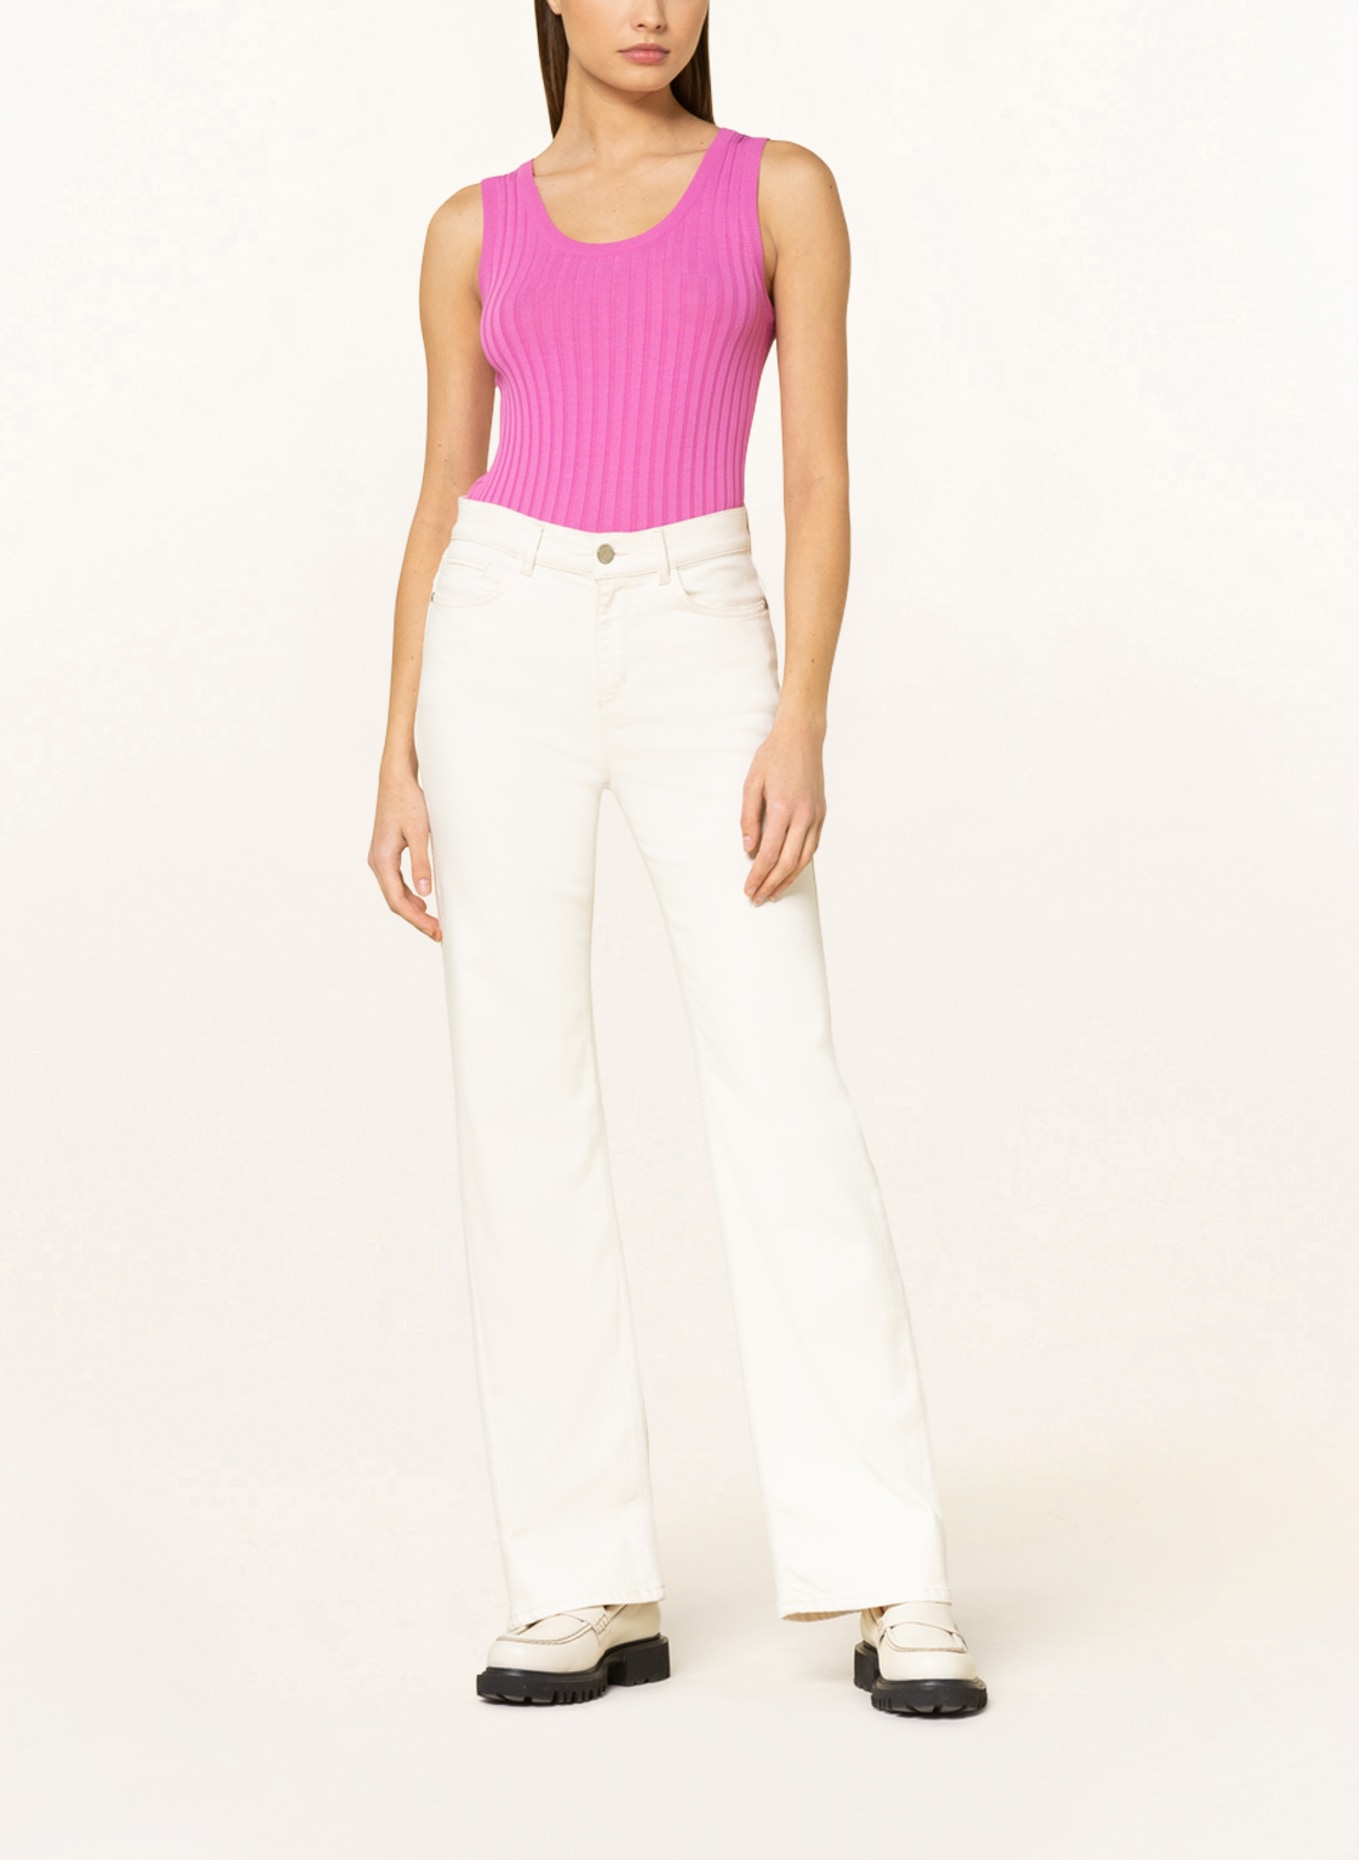 RIANI Knit top, Color: PINK (Image 2)